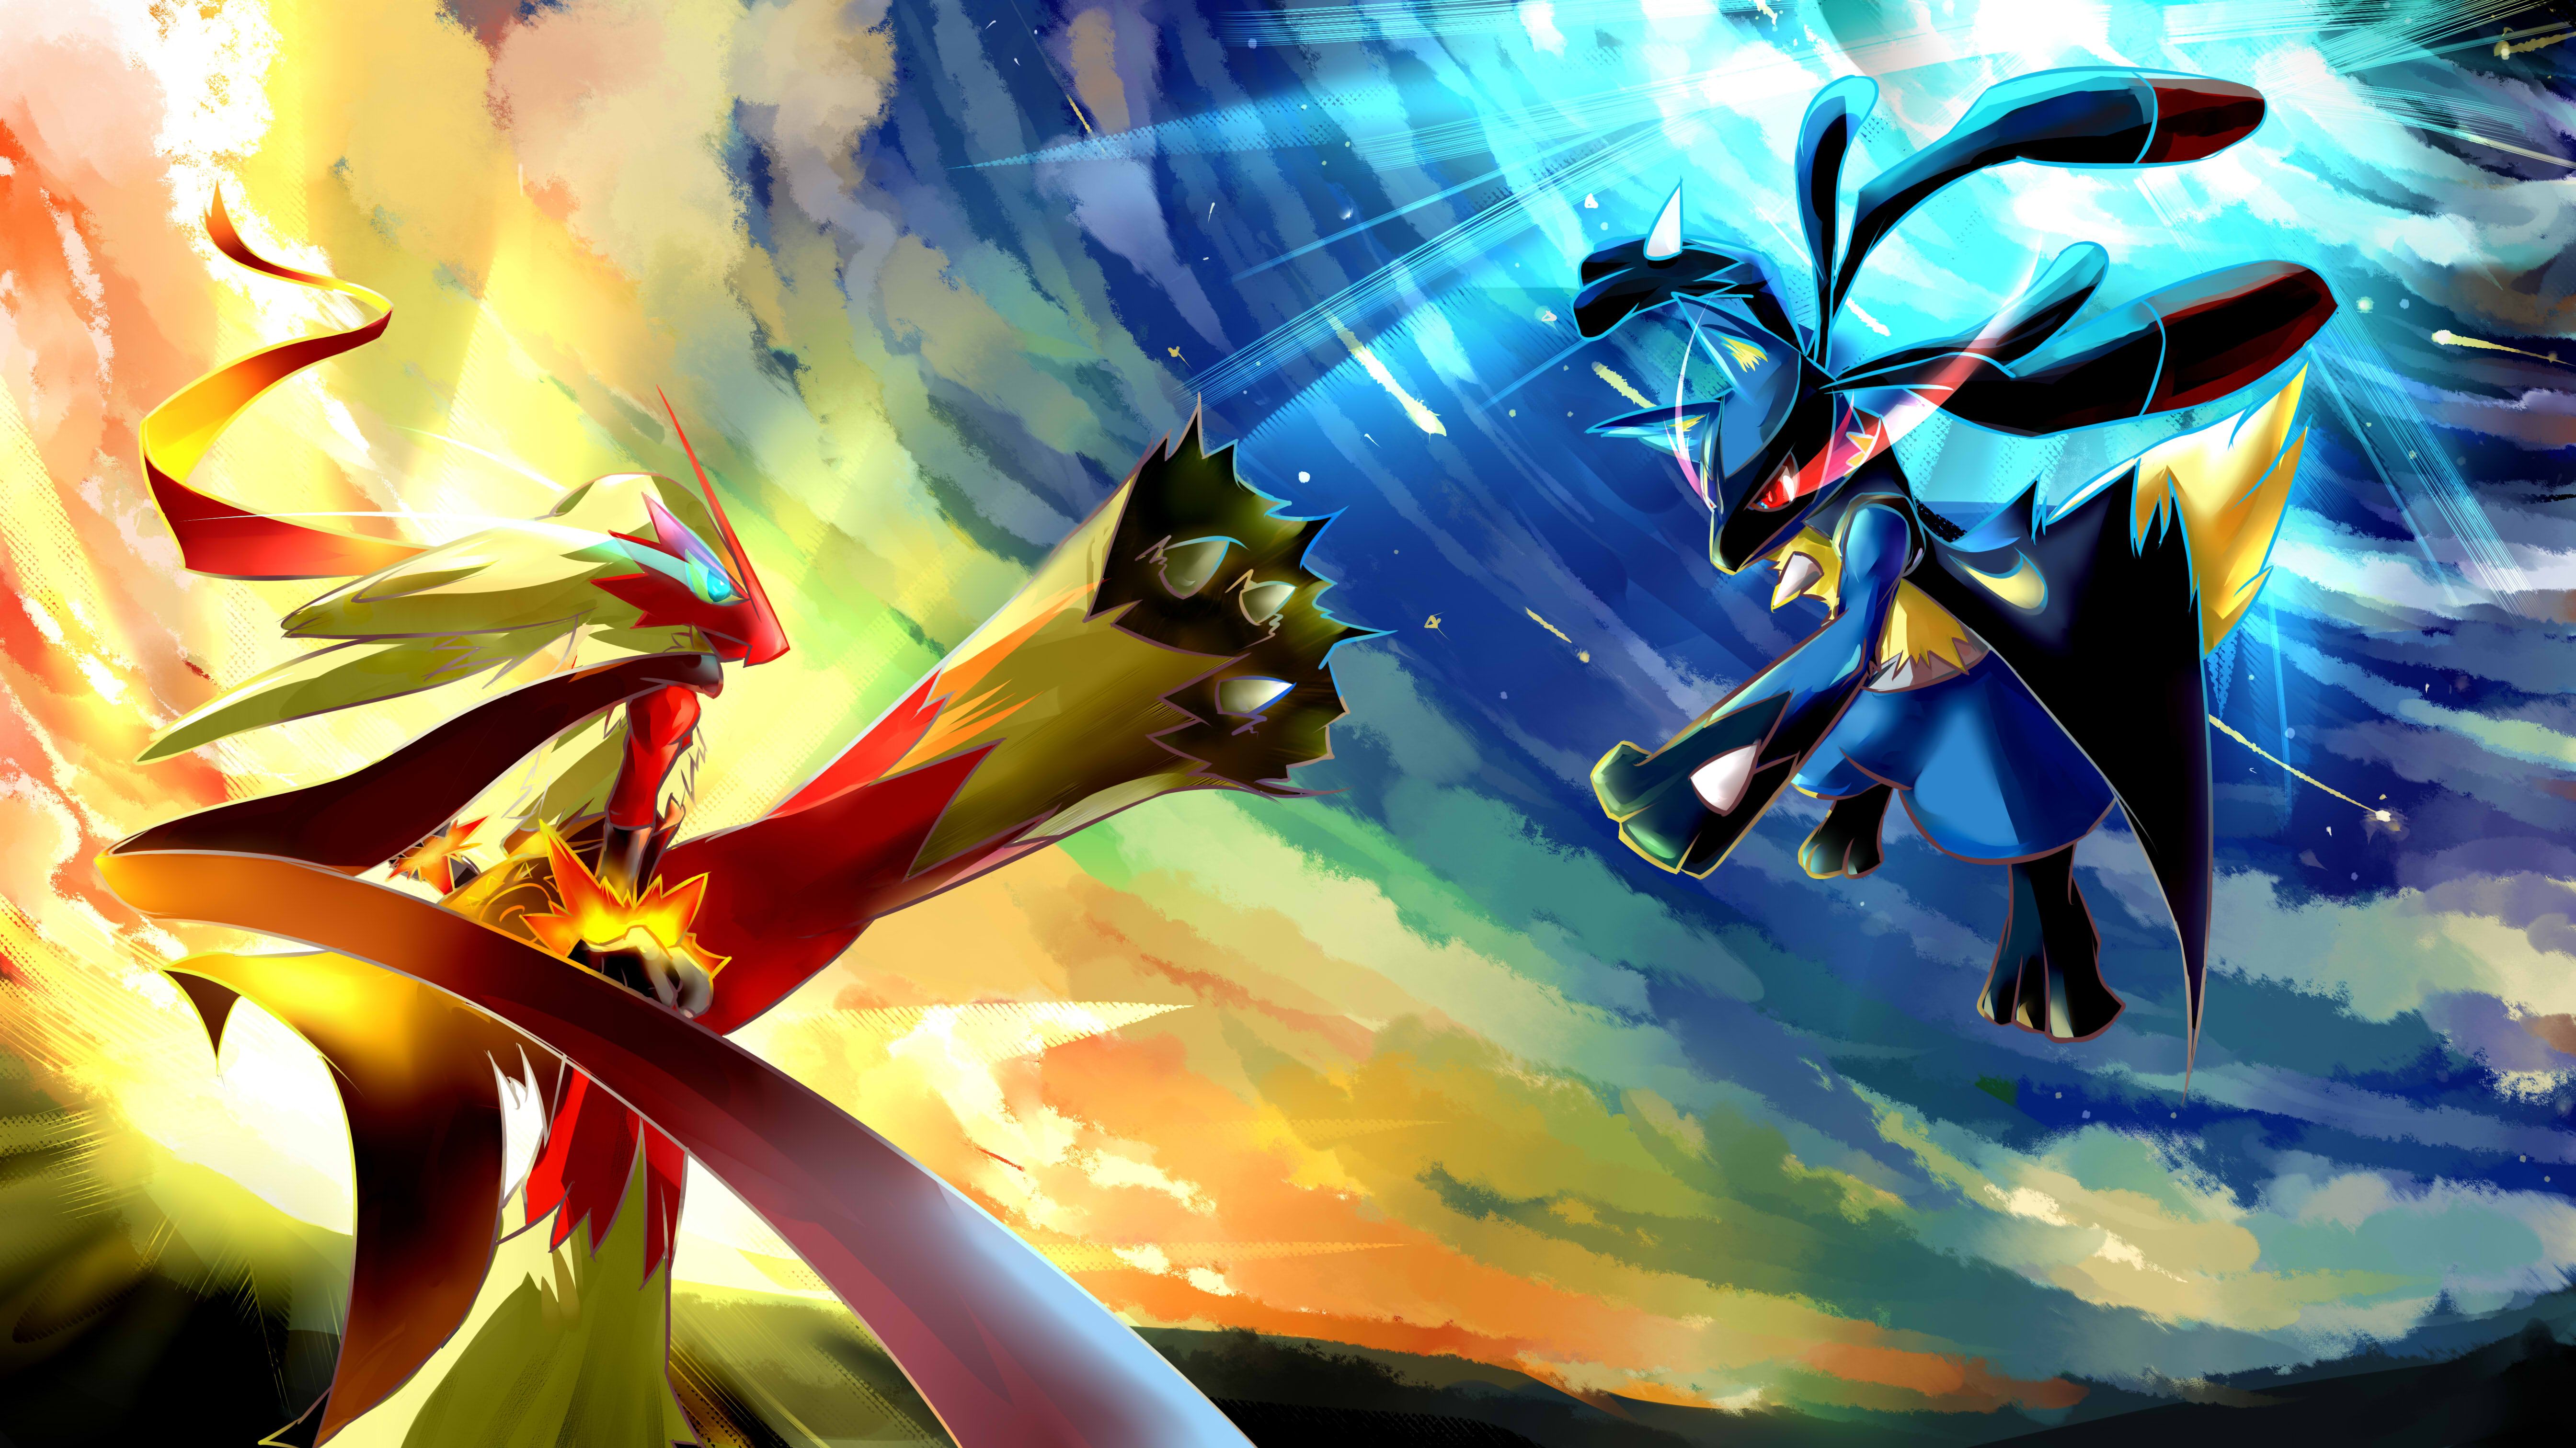 3 Lucario (Pokémon) HD Wallpapers | Backgrounds - Wallpaper Abyss